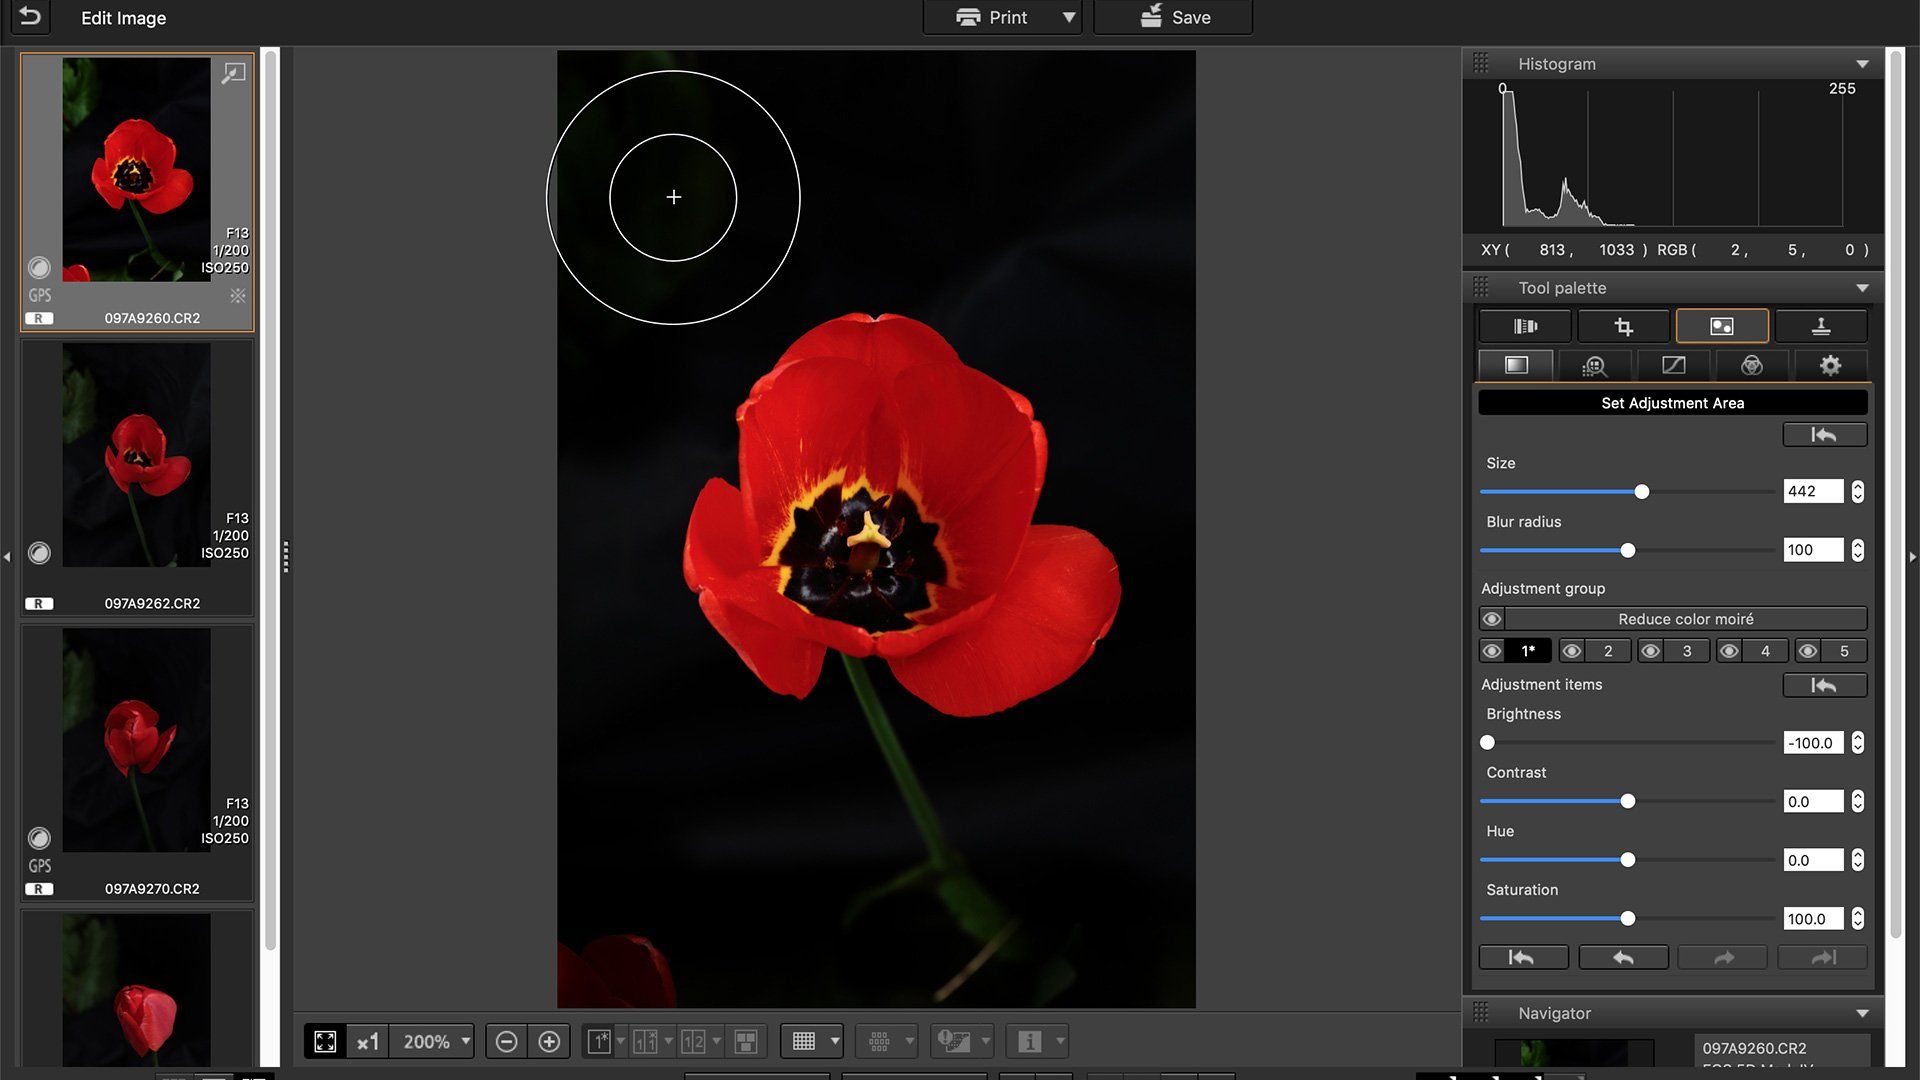 An image of a tulip is tweaked in Canon's Digital Photo Professional imaging software.